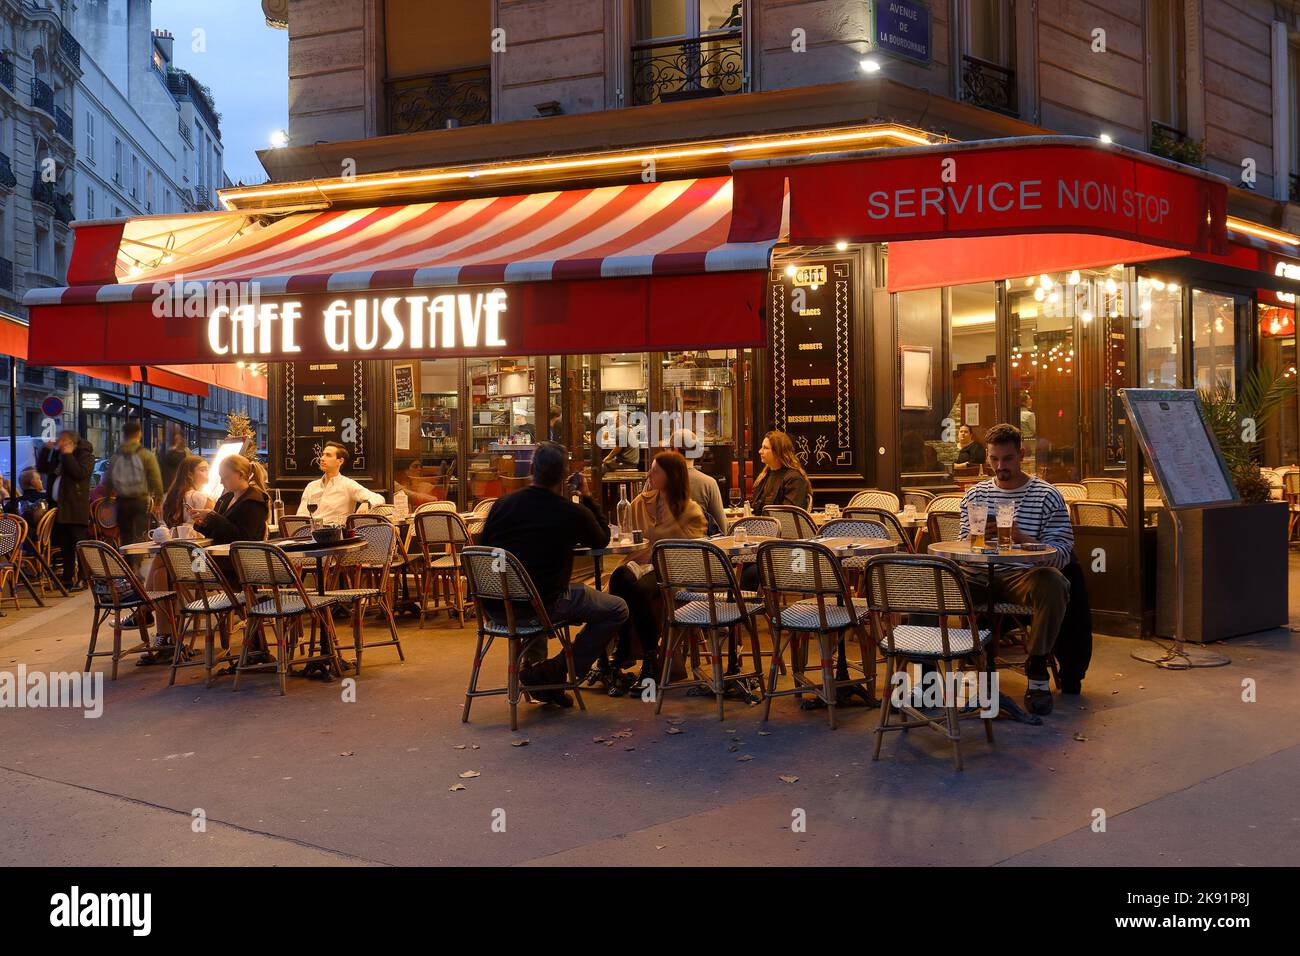 Cafe Gustave is typical French cafe located near the Eiffel tower in ...